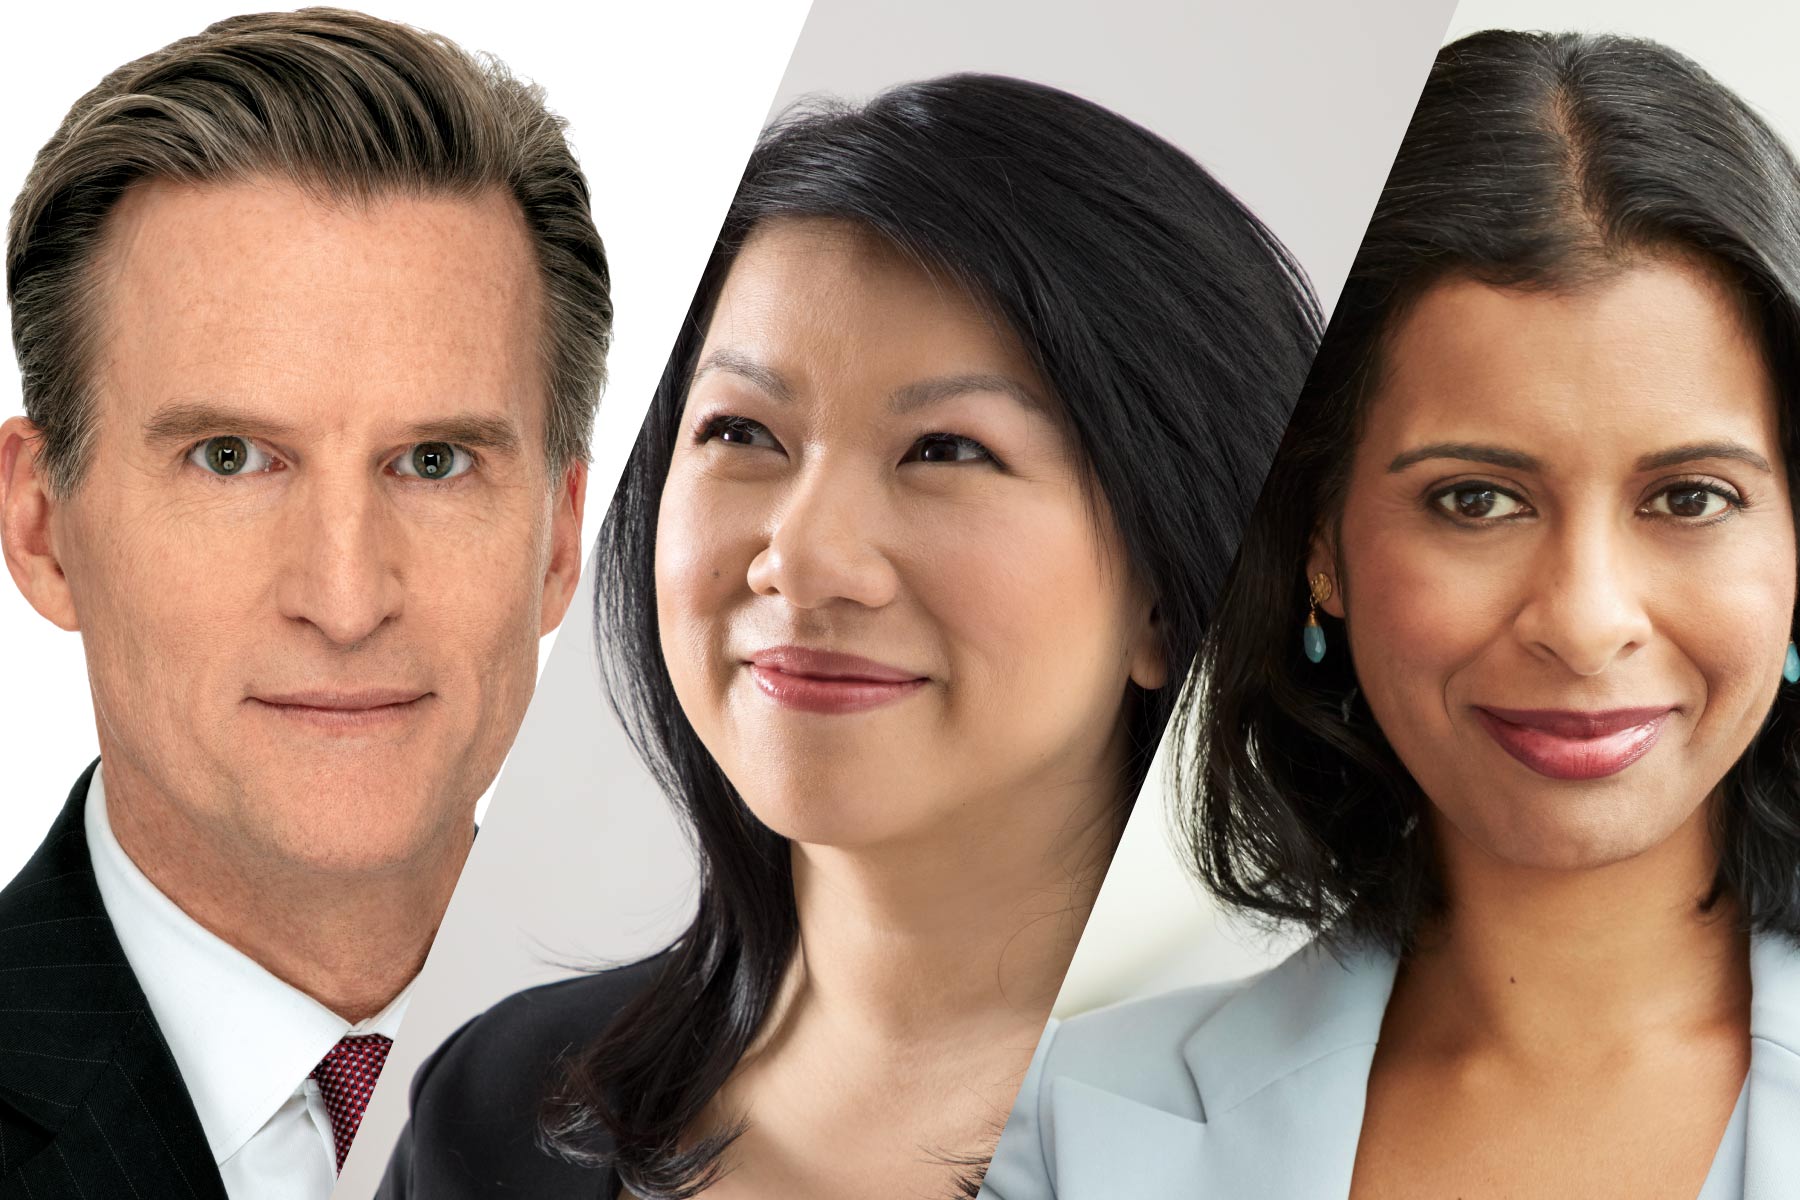 Headshots of Macy’s CEO Jeff Gennette, Zola CEO Shan-Lyn Ma, and Crate and Barrel CEO Neela Montgomery